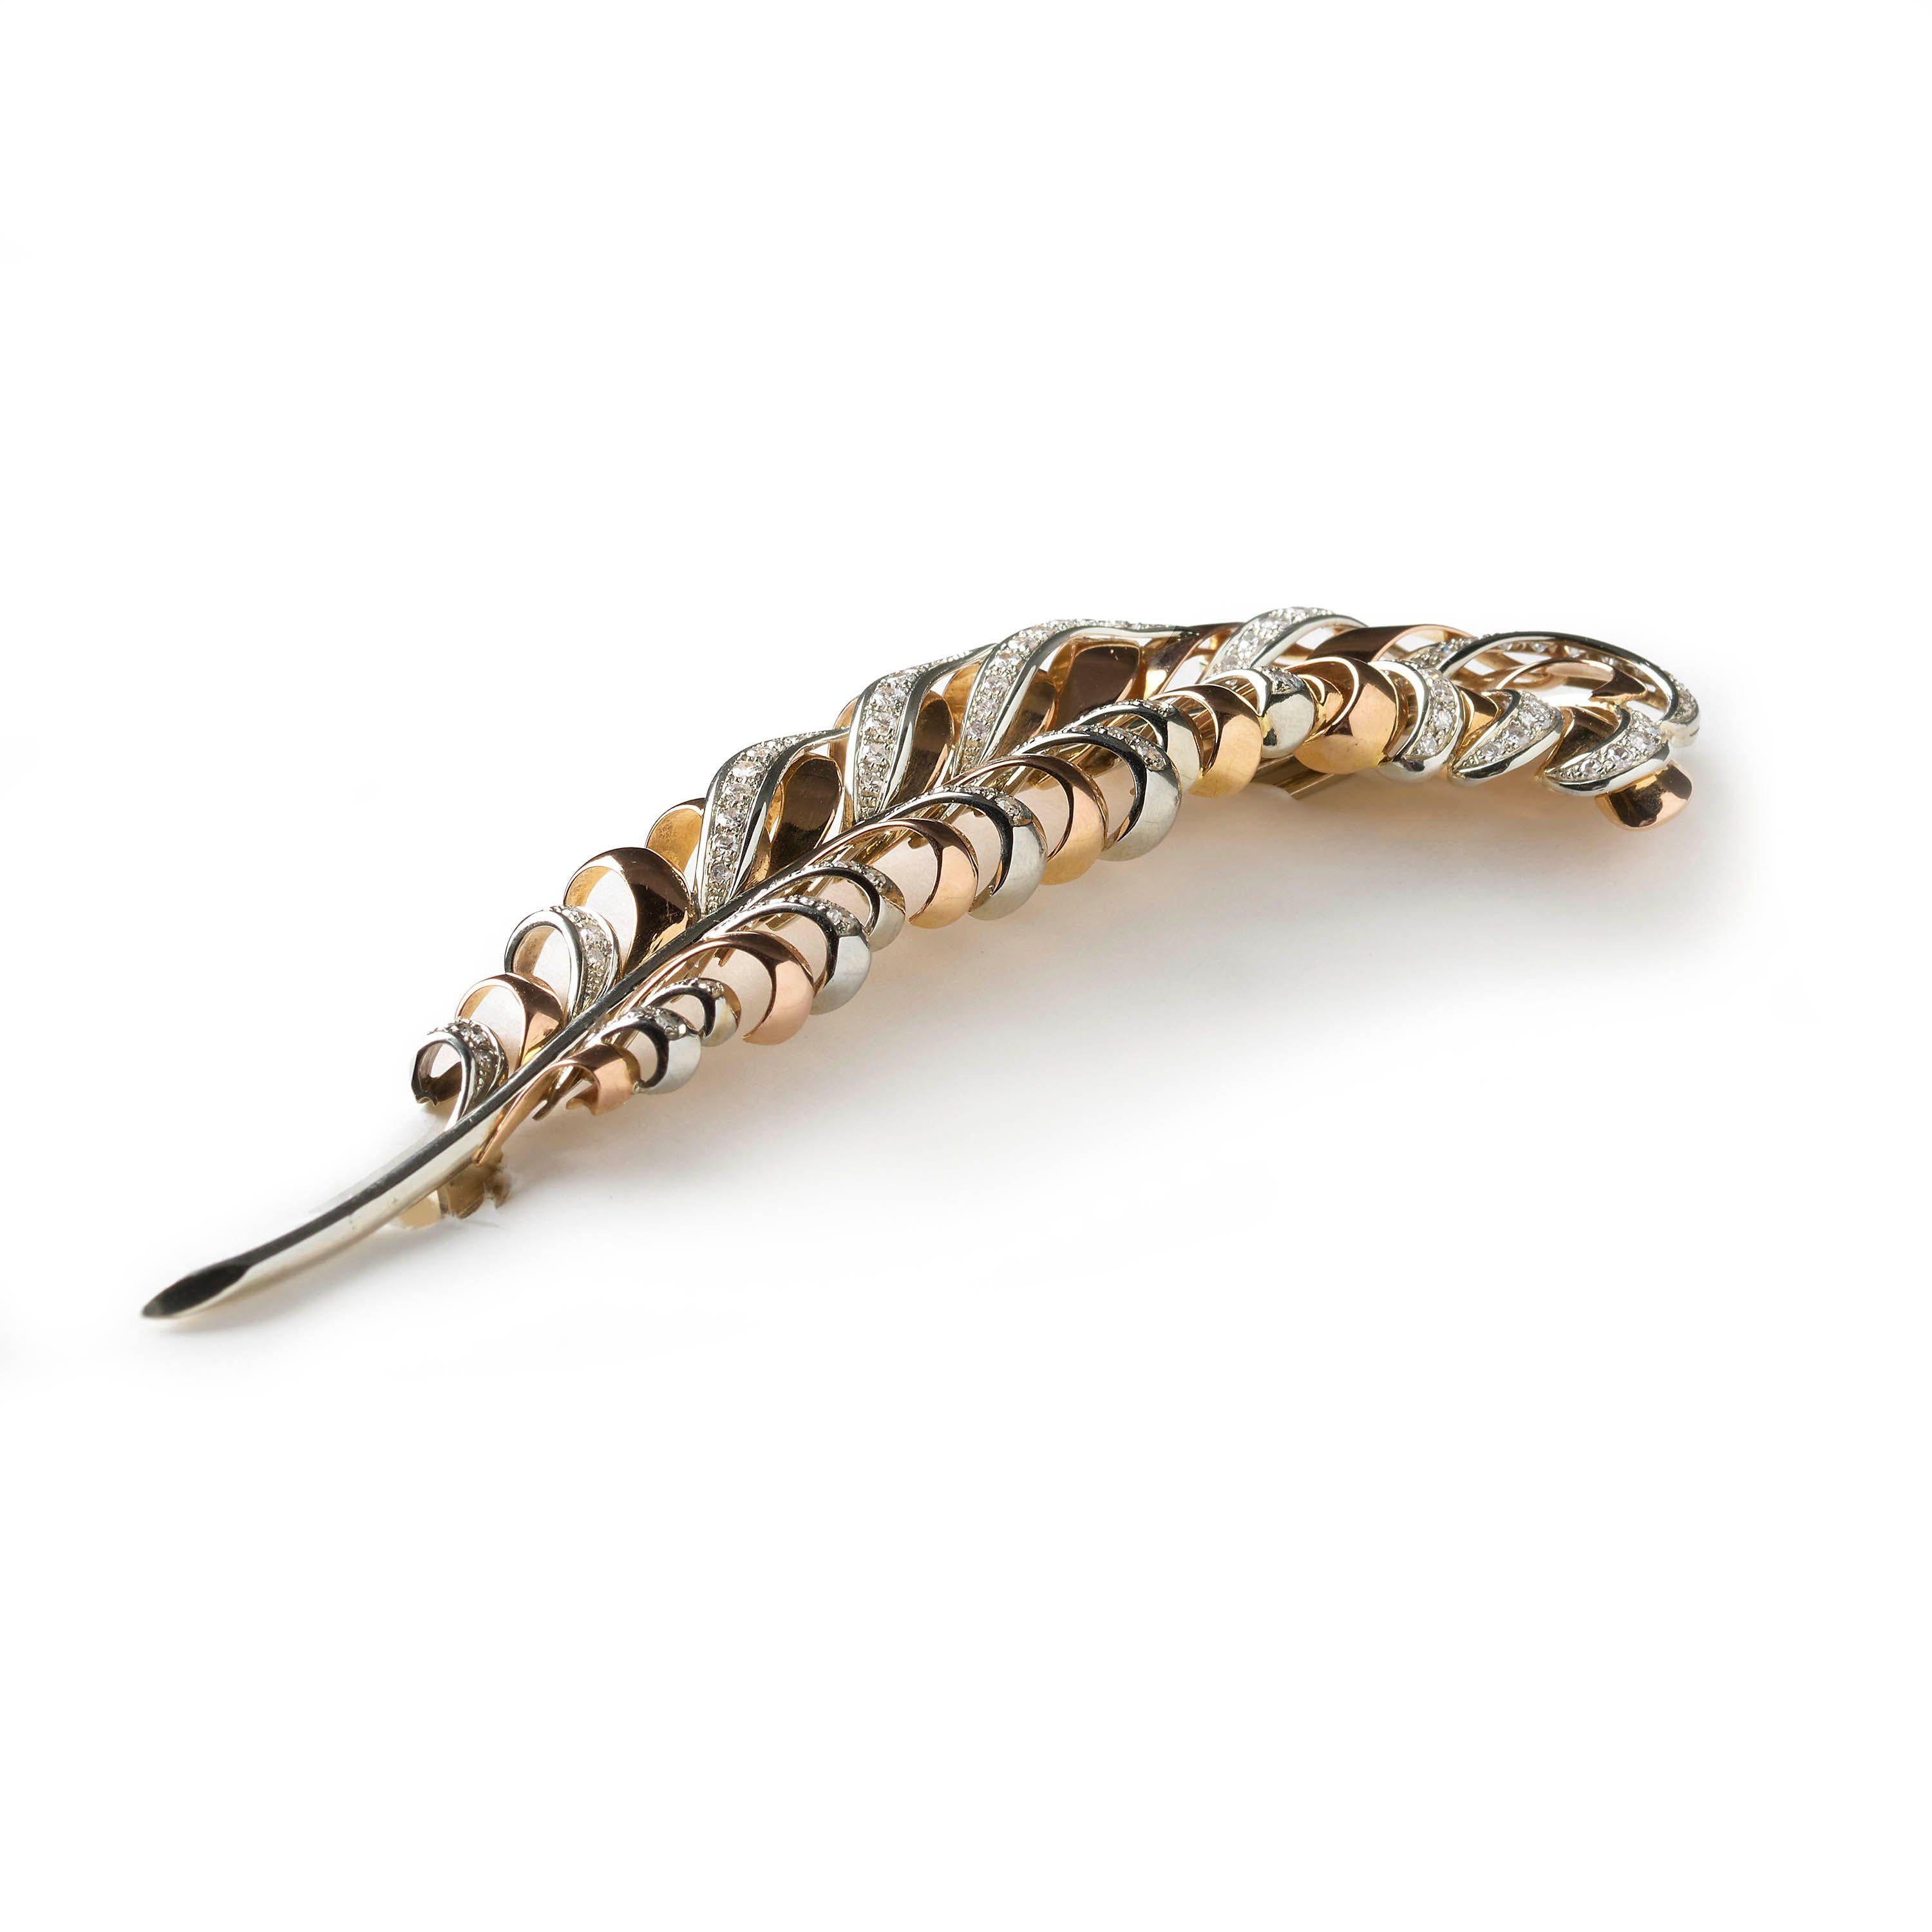 A vintage gold and diamond feather brooch, with brilliant-cut and single-cut diamonds set within white gold plumage, weighing an estimated total of 3.50 carats, all mounted in 18ct gold. Circa 1950. 